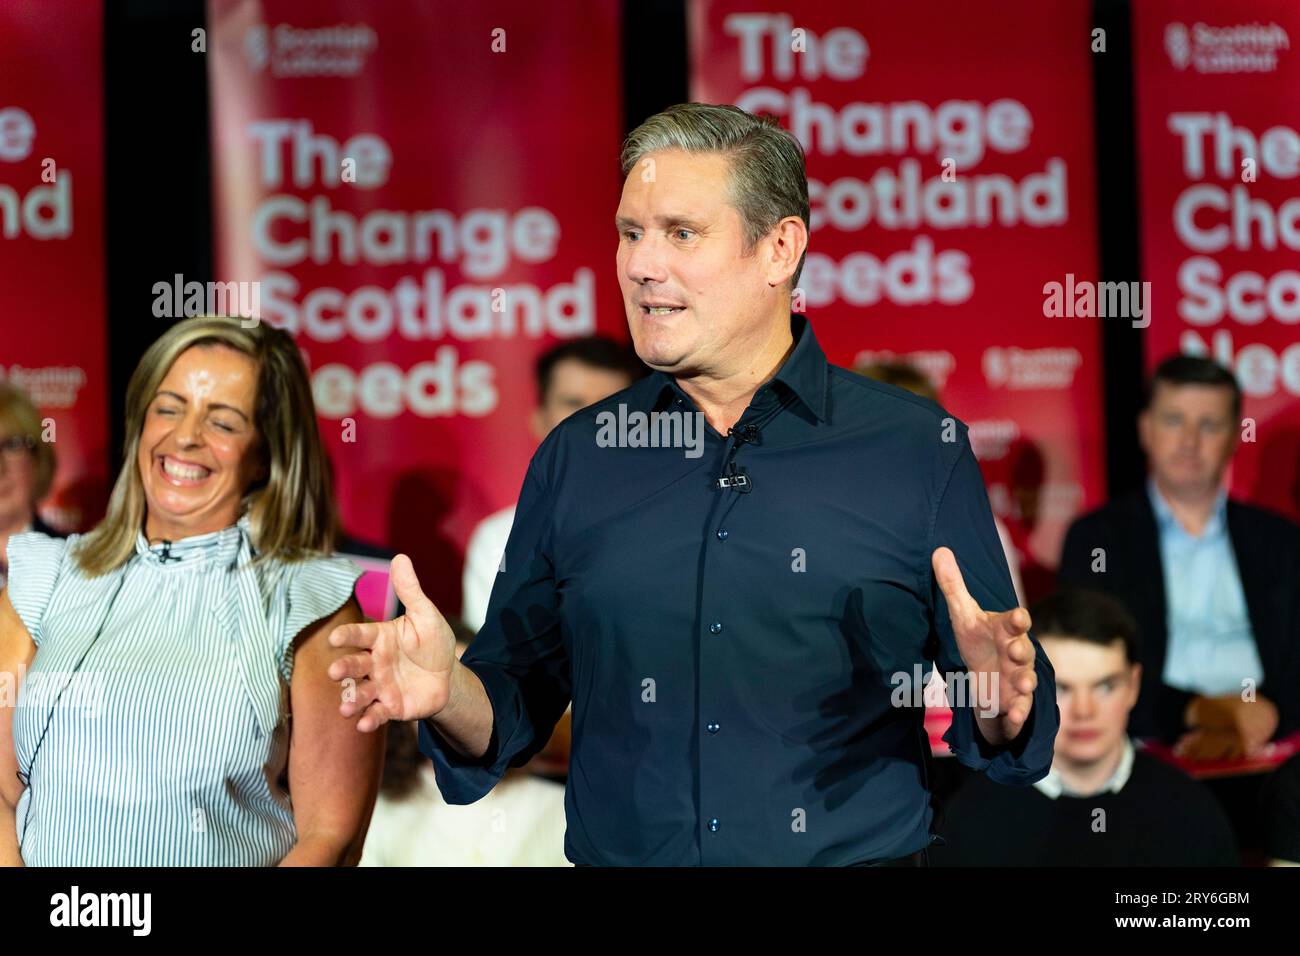 Hamilton, Scotland, UK. 29th September 2023.  Leader of the Labour Party, Sir Keir Starmer, joined Anas Sarwar, Michael Shanks and Jackie Baillie for a Scottish Labour rally ahead of the Rutherglen and Hamilton West by-election next week. The Scottish Labour Party is hoping to take the seat from the SNP.  Pic; Sir Keir Starmer. Iain Masterton/Alamy Live News Stock Photo